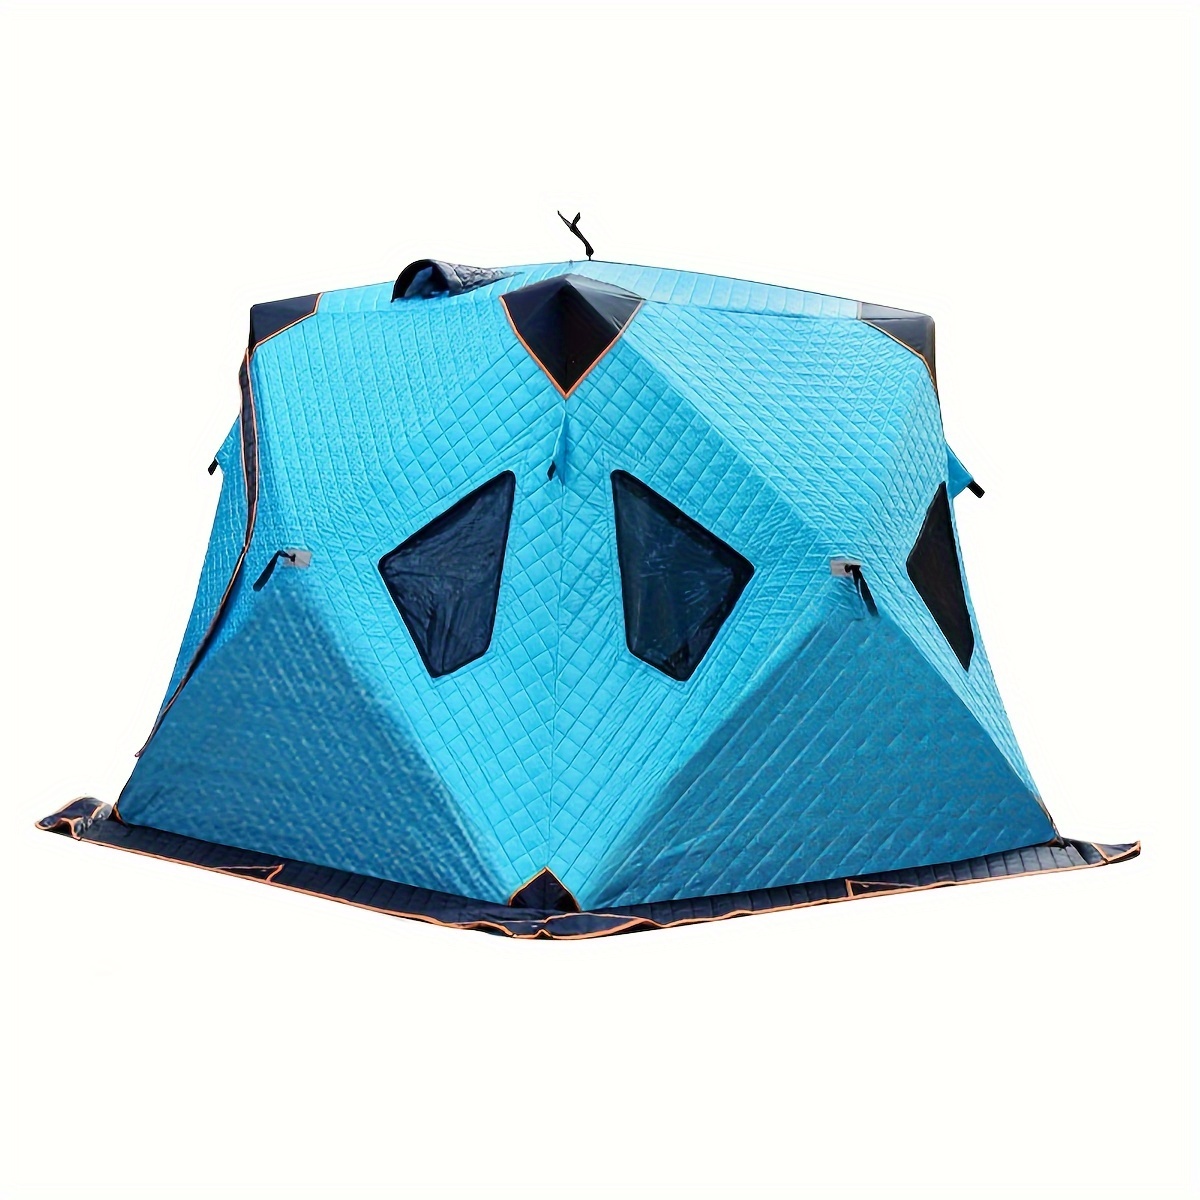 Portable Ice Fishing Tent Suitable 3 4 People Thick Warm - Temu